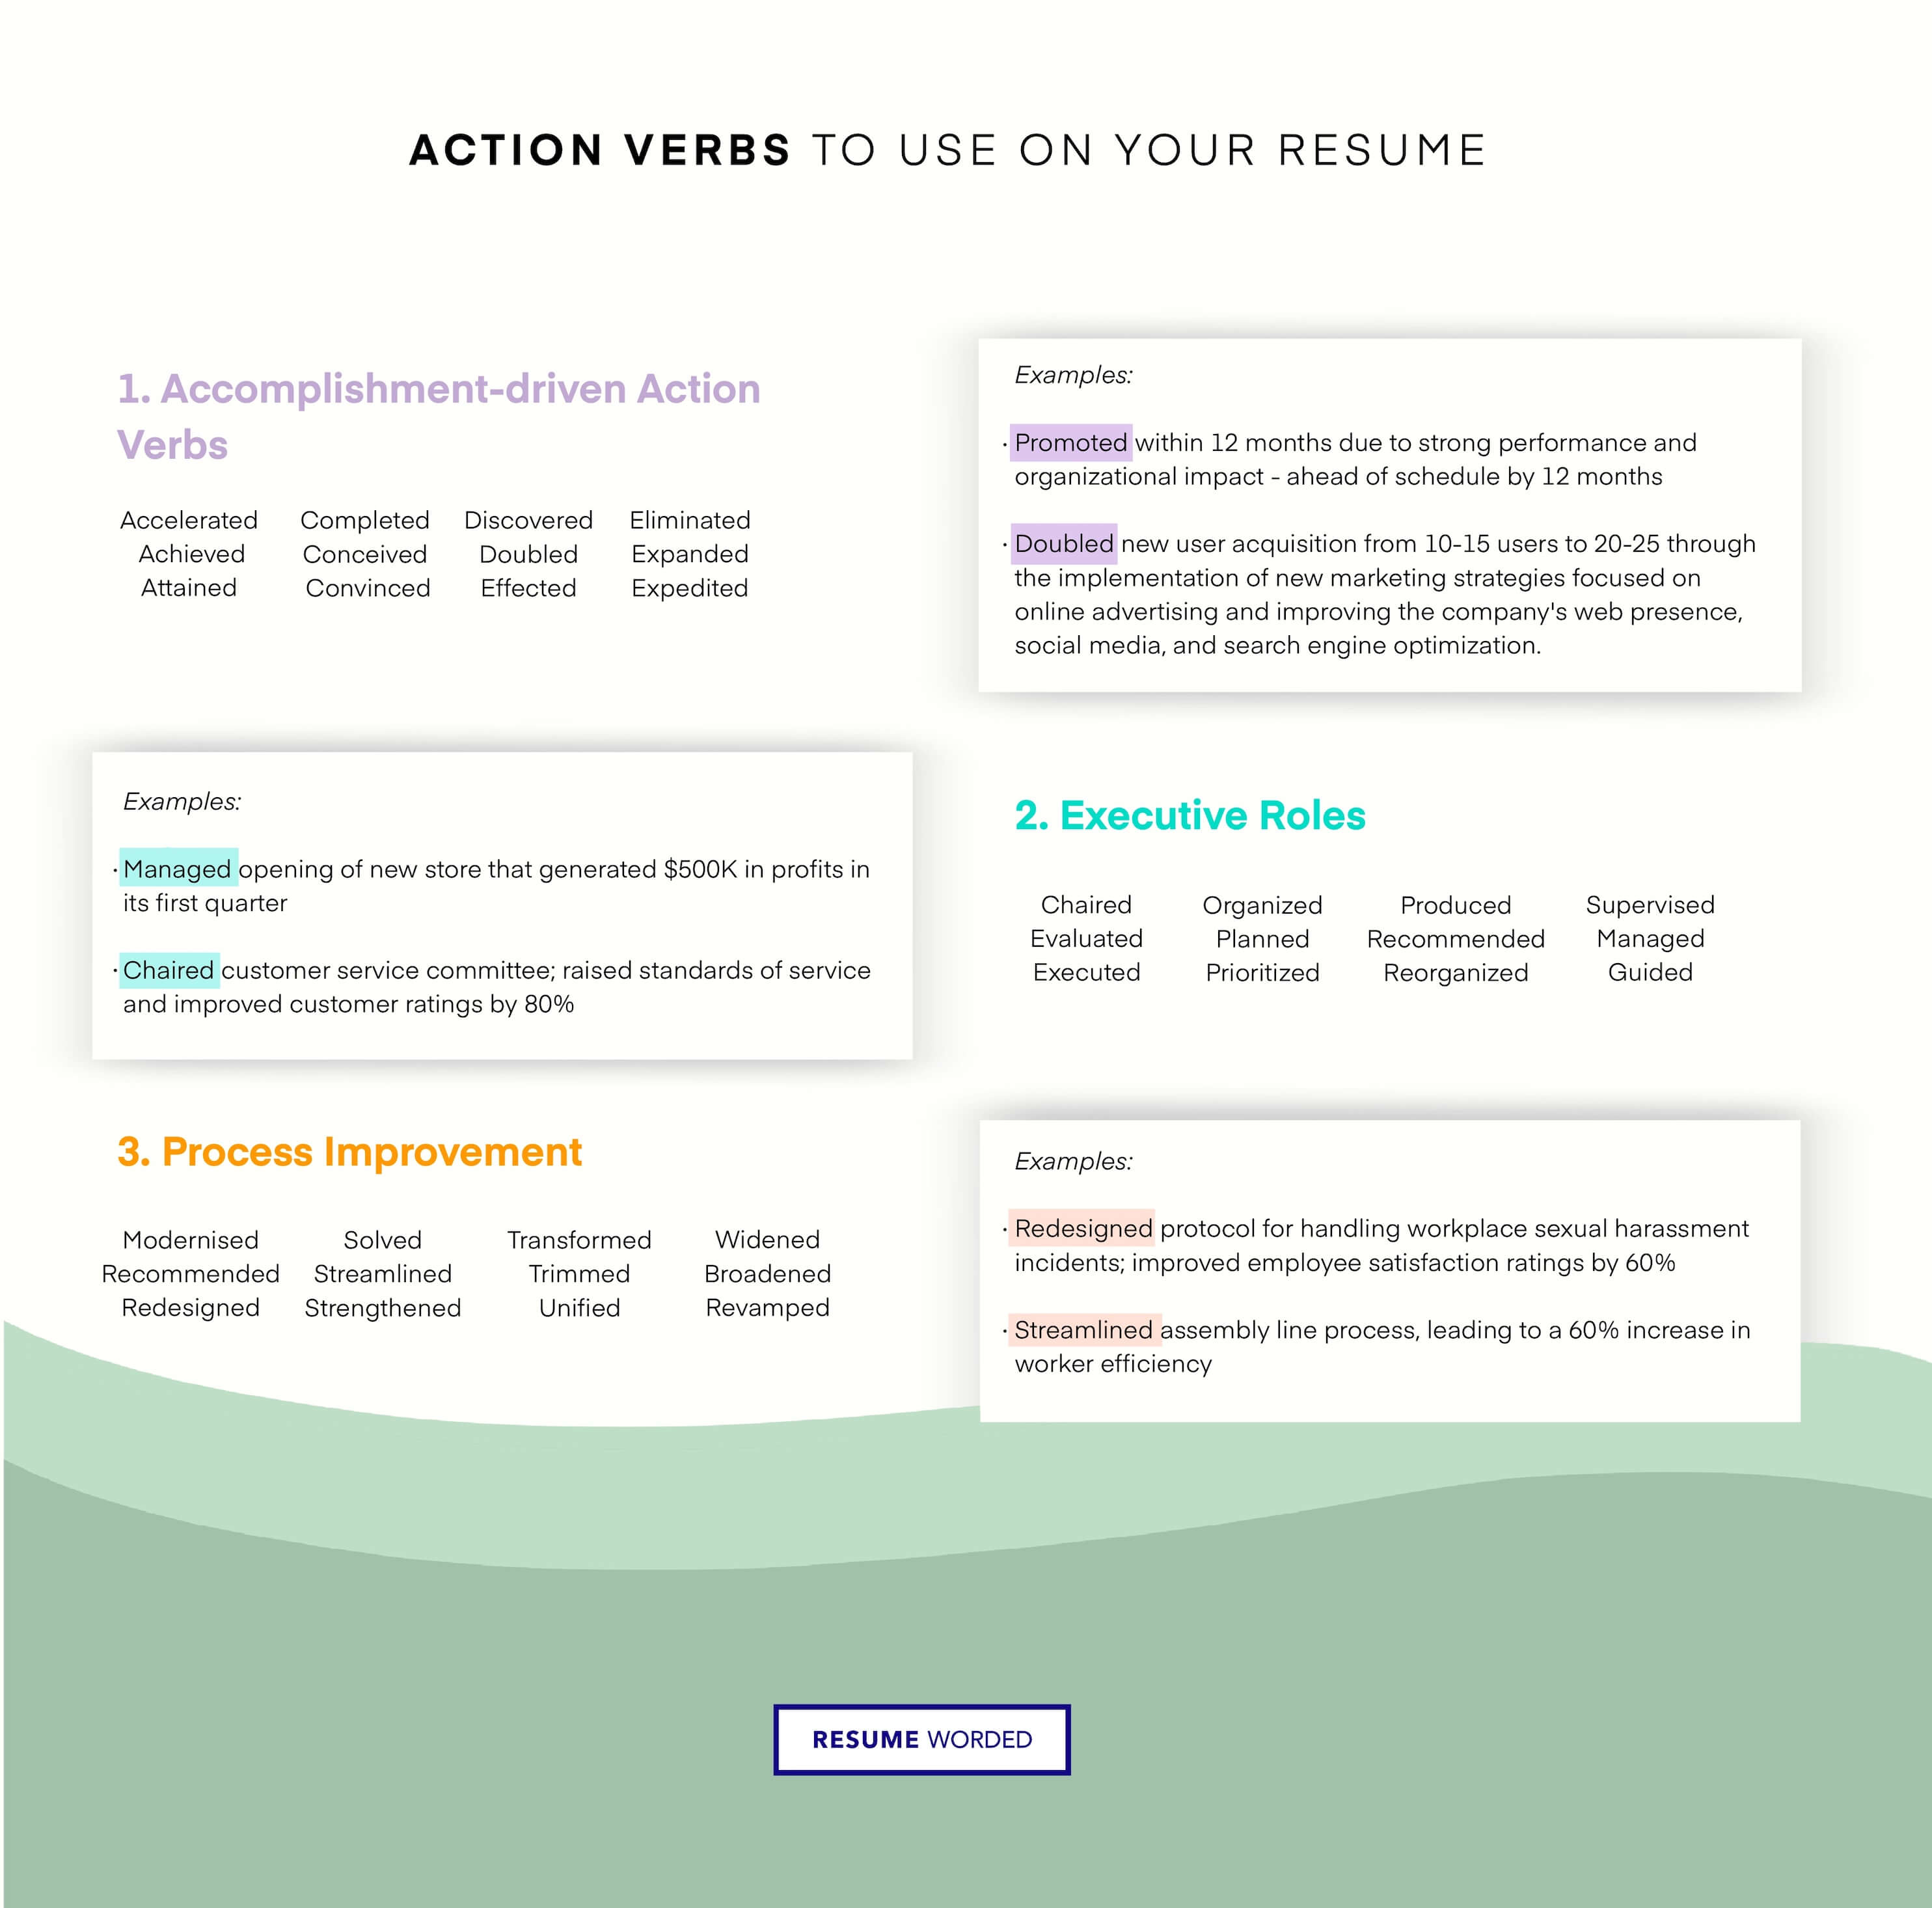 Use strong action verbs and metrics to emphasize your achievements - Junior Network Administrator Resume